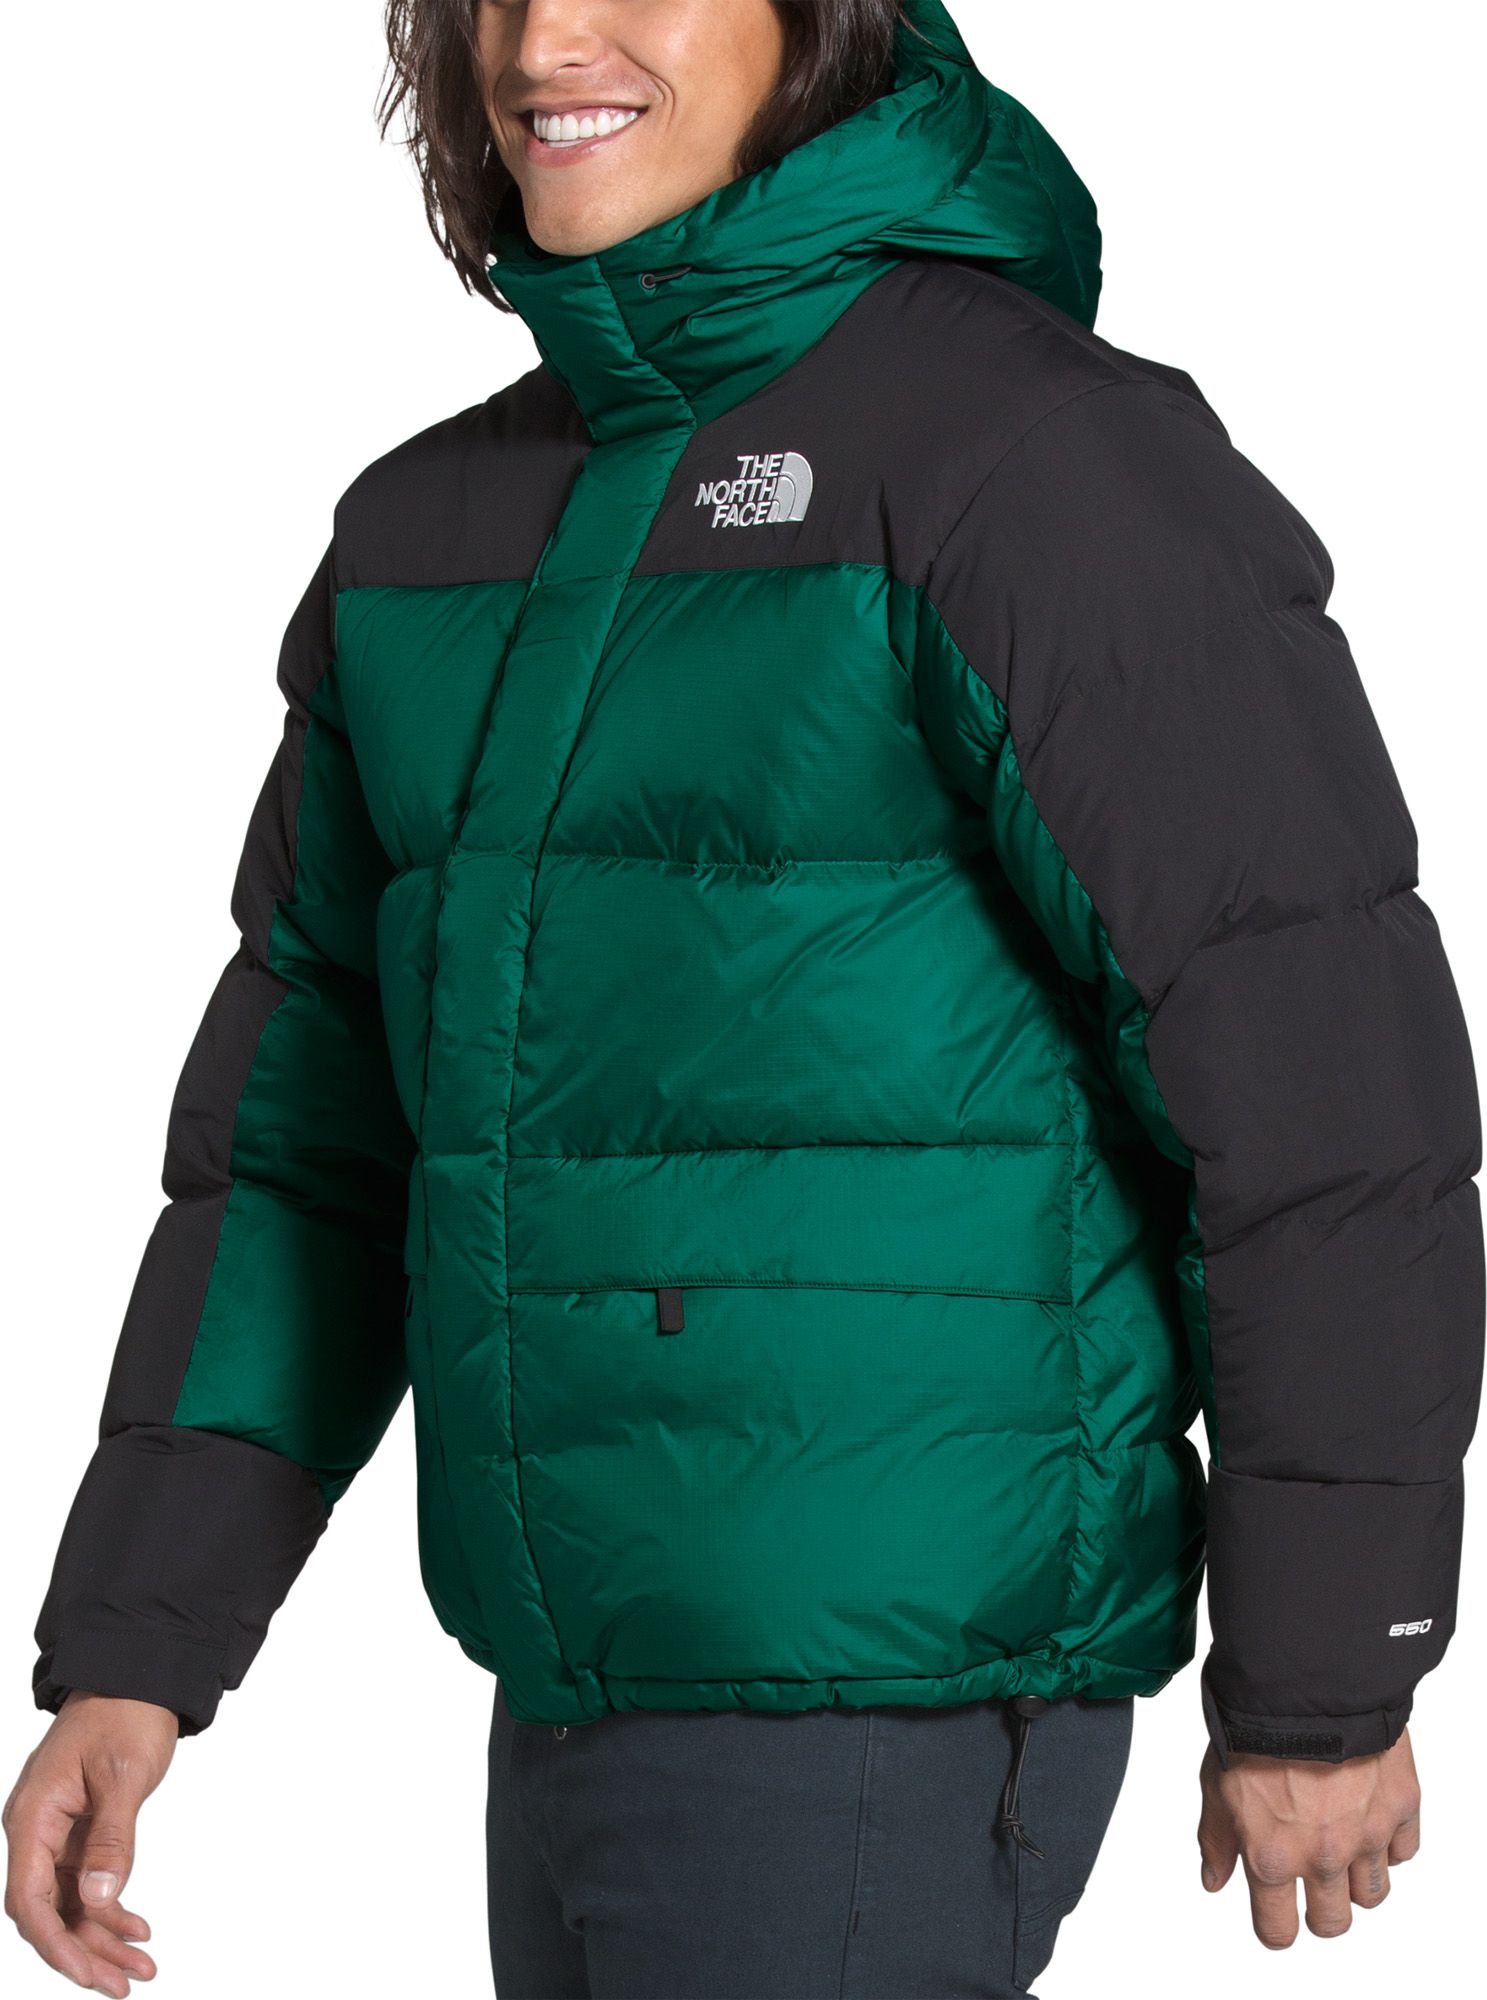 The North Face Himalayan Clearance, 61% OFF | www.ilpungolo.org